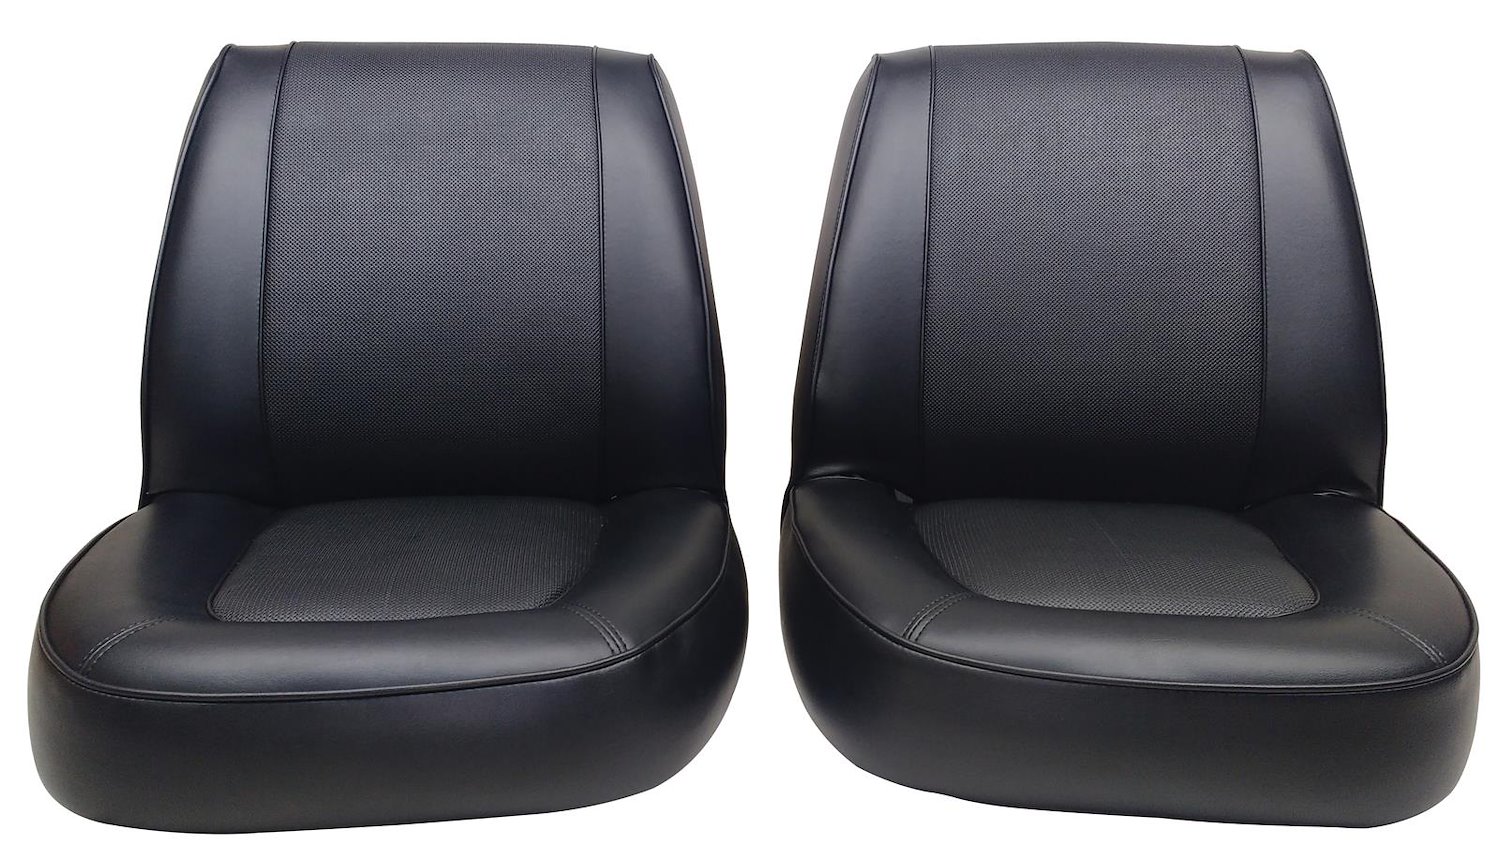 1962-1964 Ford Econoline Falcon Deluxe Club Wagon Interior Front Bucket Seat Upholsterty Set